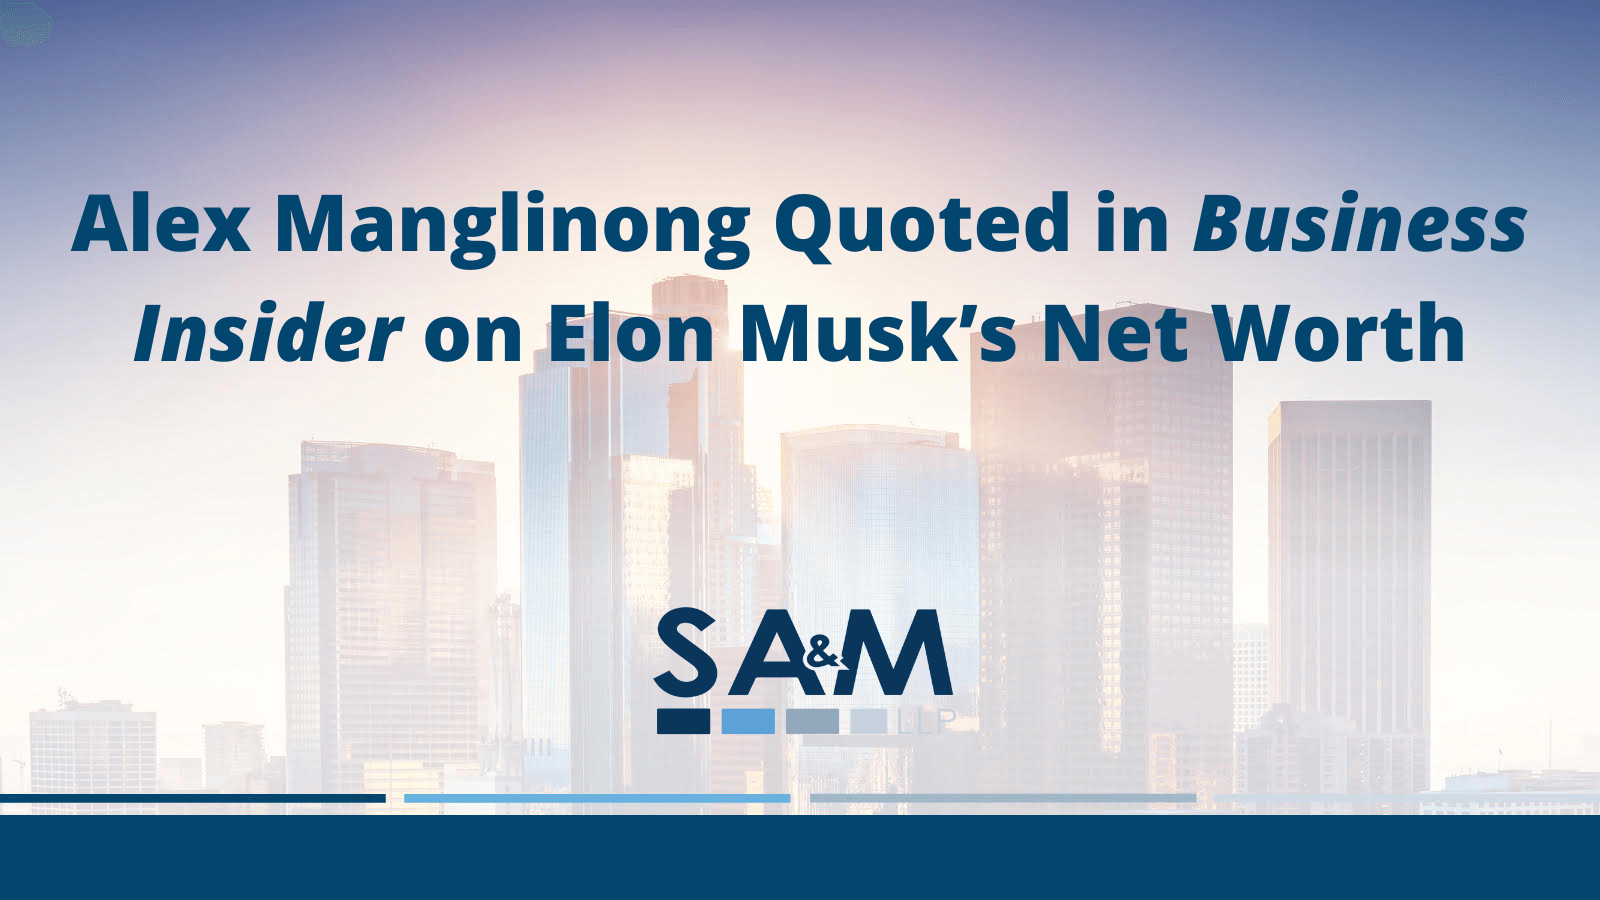 Alex Manglinong Quoted in Business Insider on Elon Musk’s Net Worth